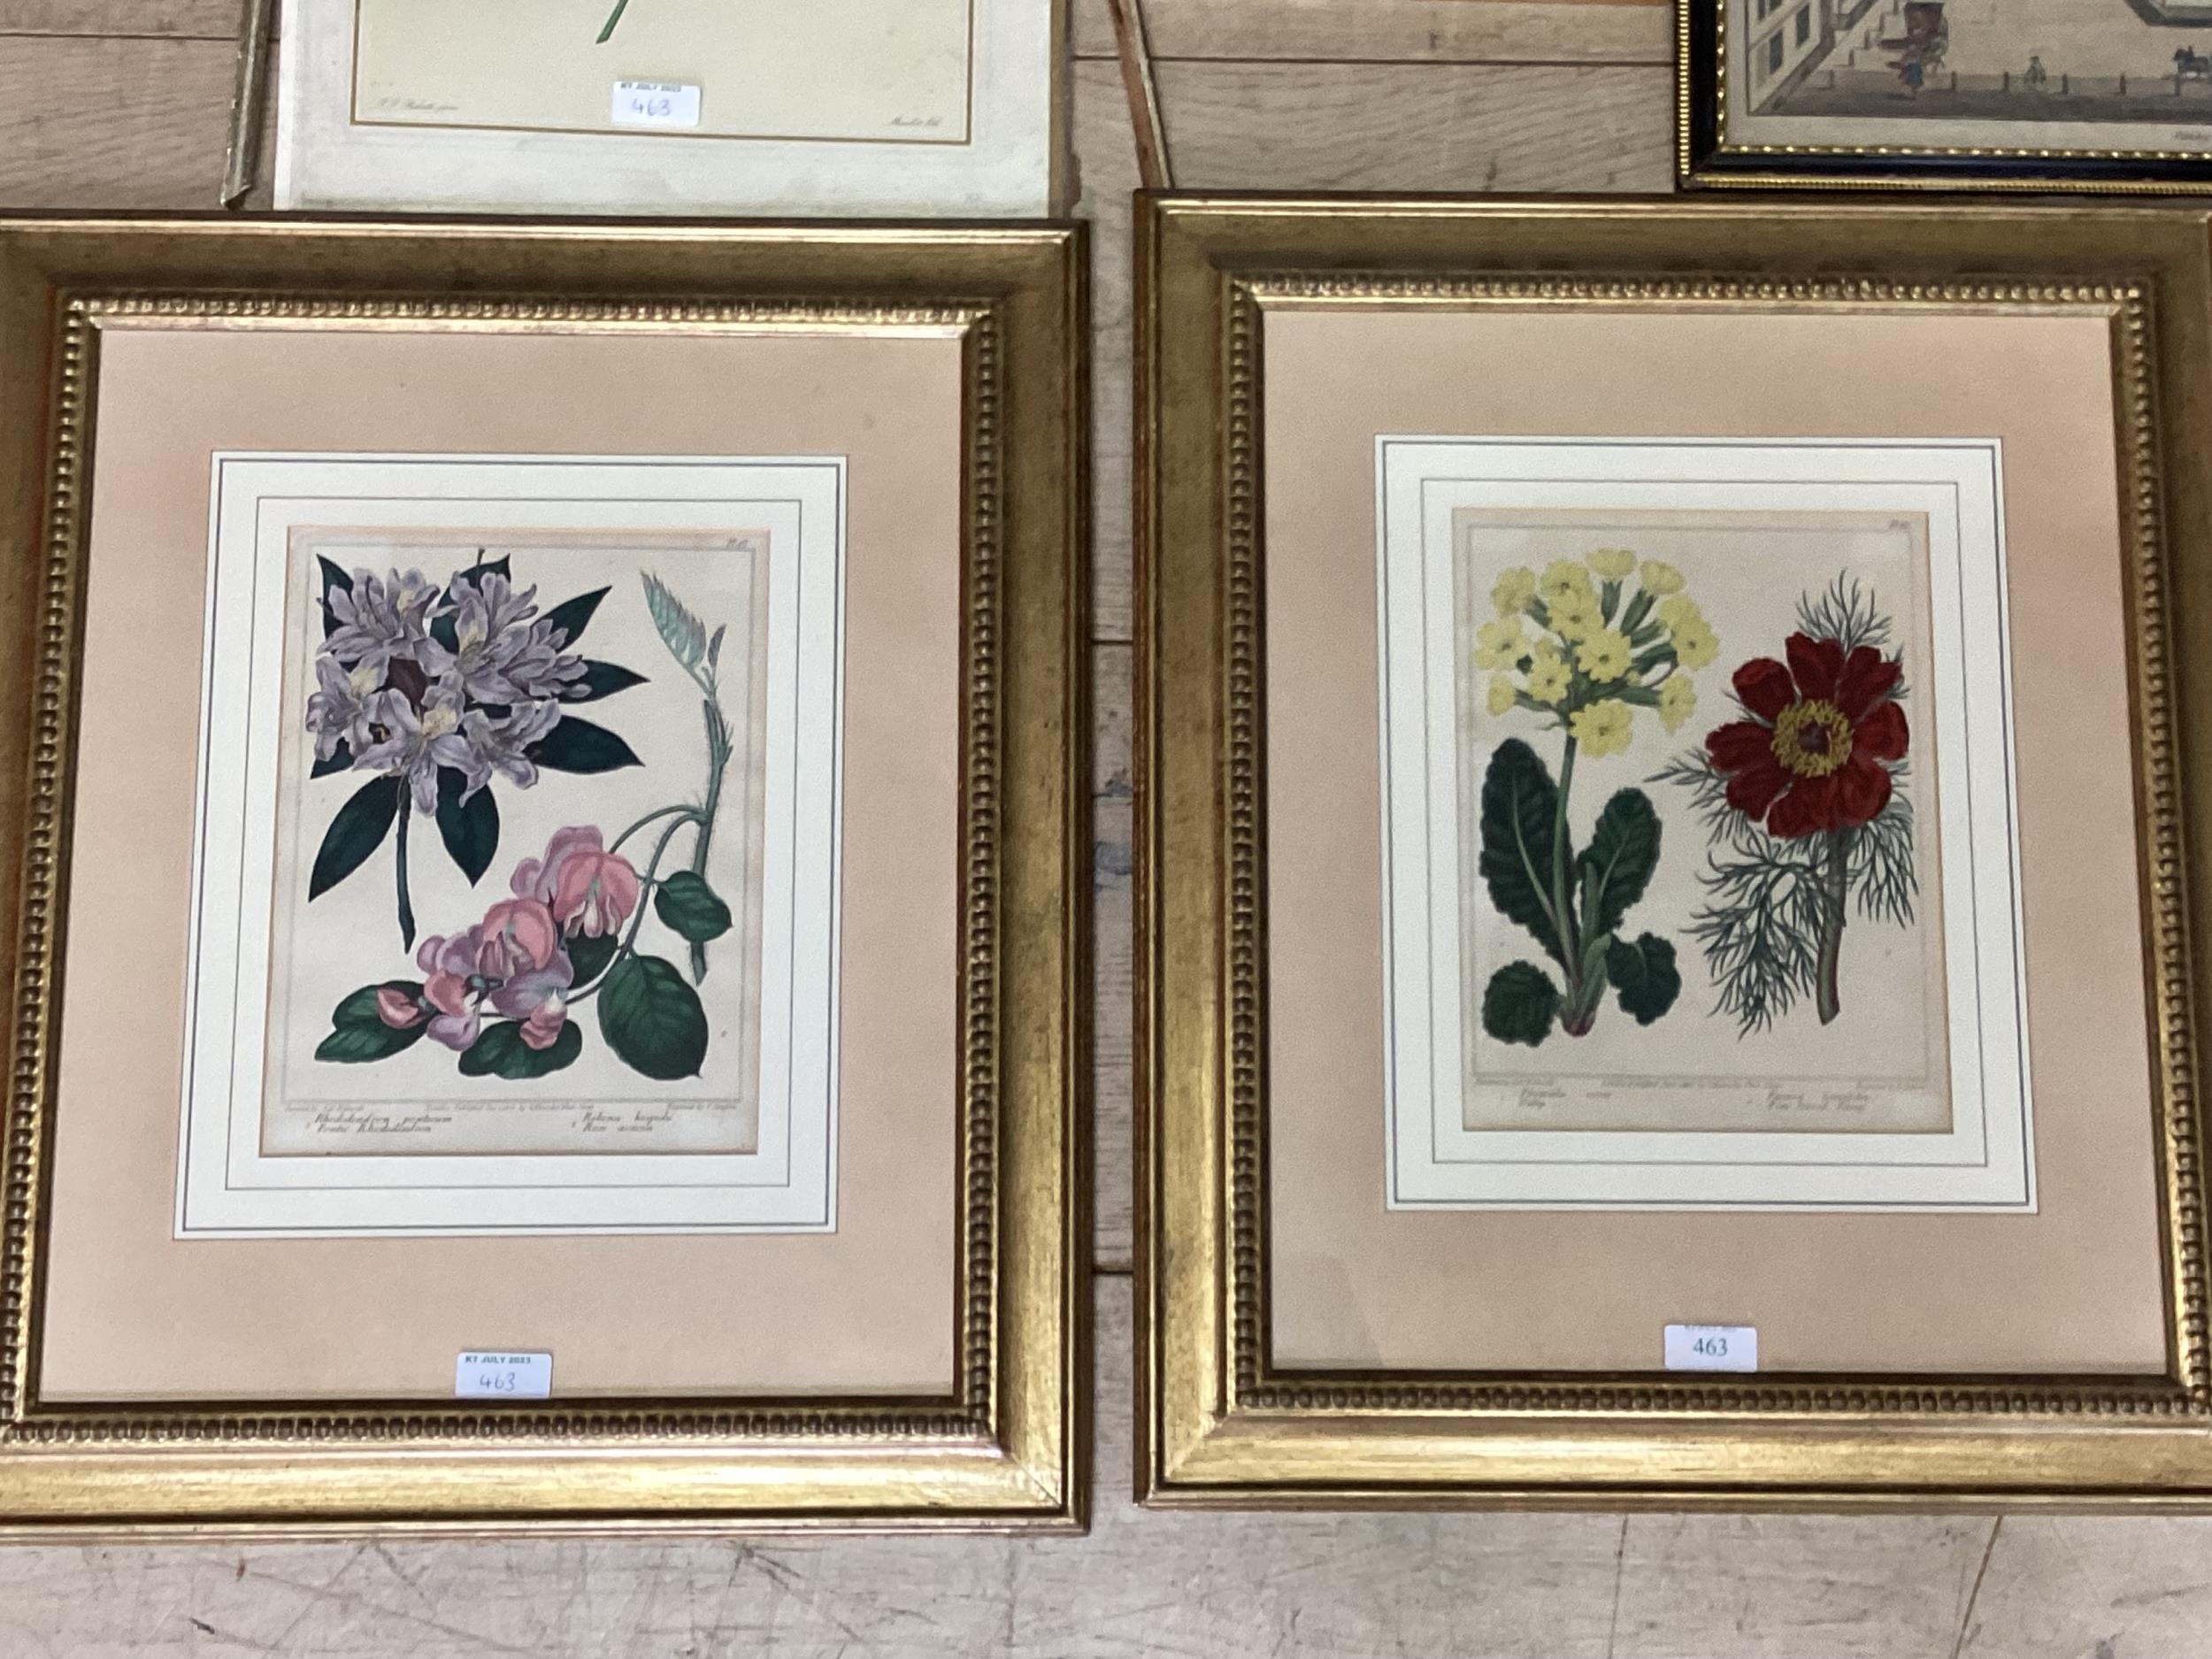 Pair of decorative gilt glazed botanical prints, pair of framed ang glazed fencing prints and a - Image 2 of 7